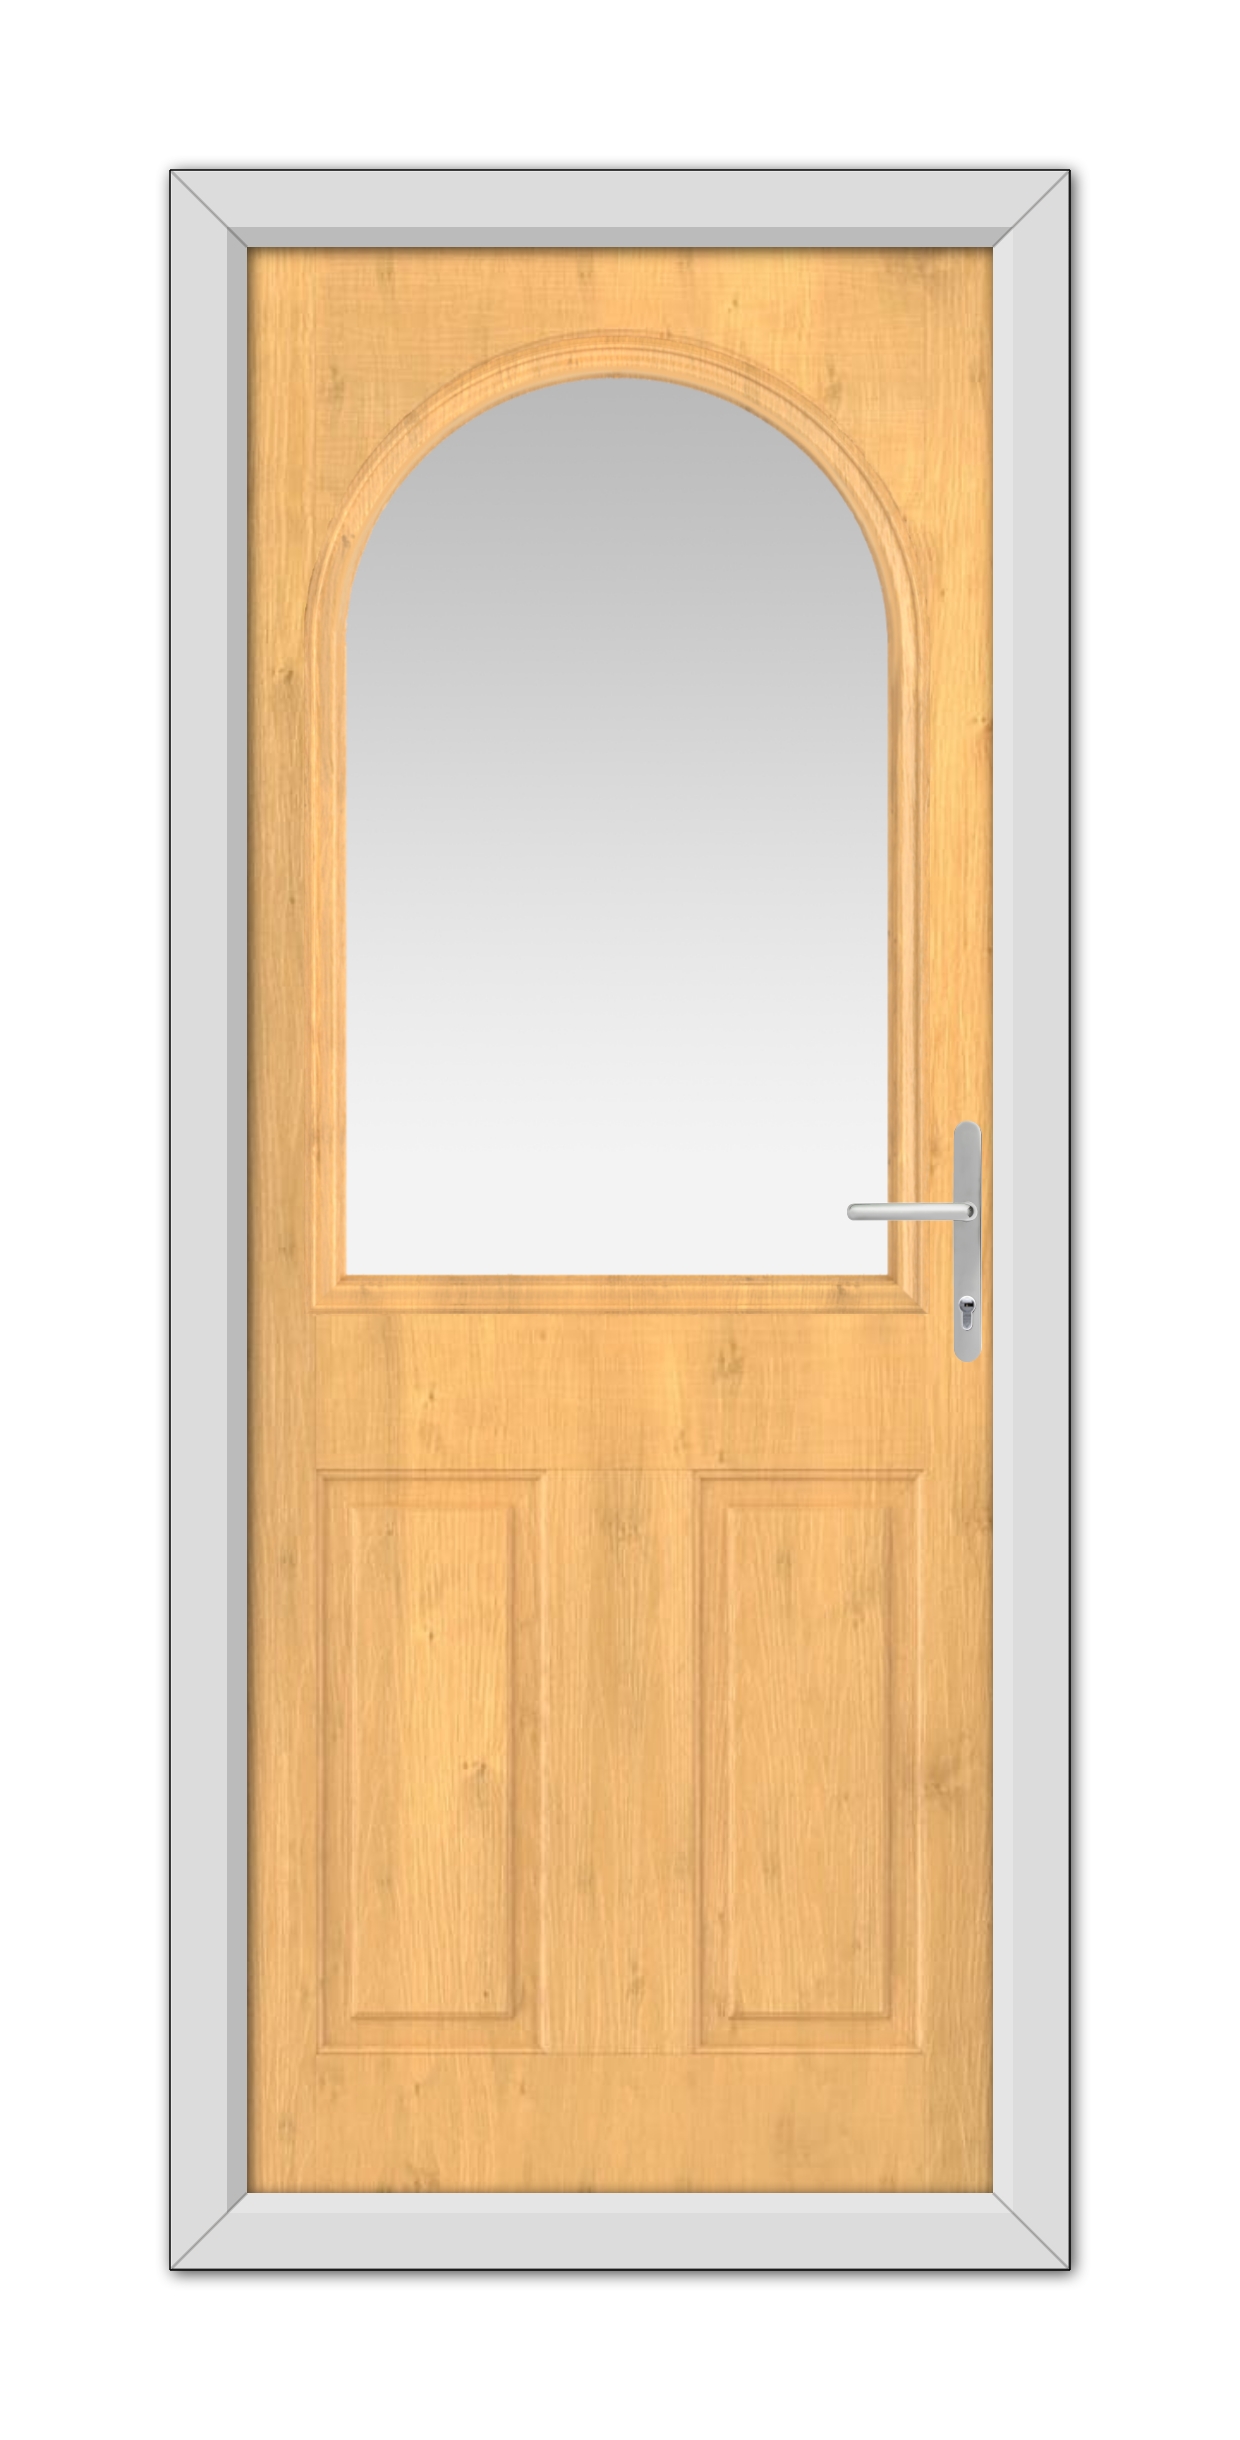 A Irish Oak Grafton Composite Door 48mm Timber Core with a large glass panel, framed in white, featuring a metallic handle on the right side.